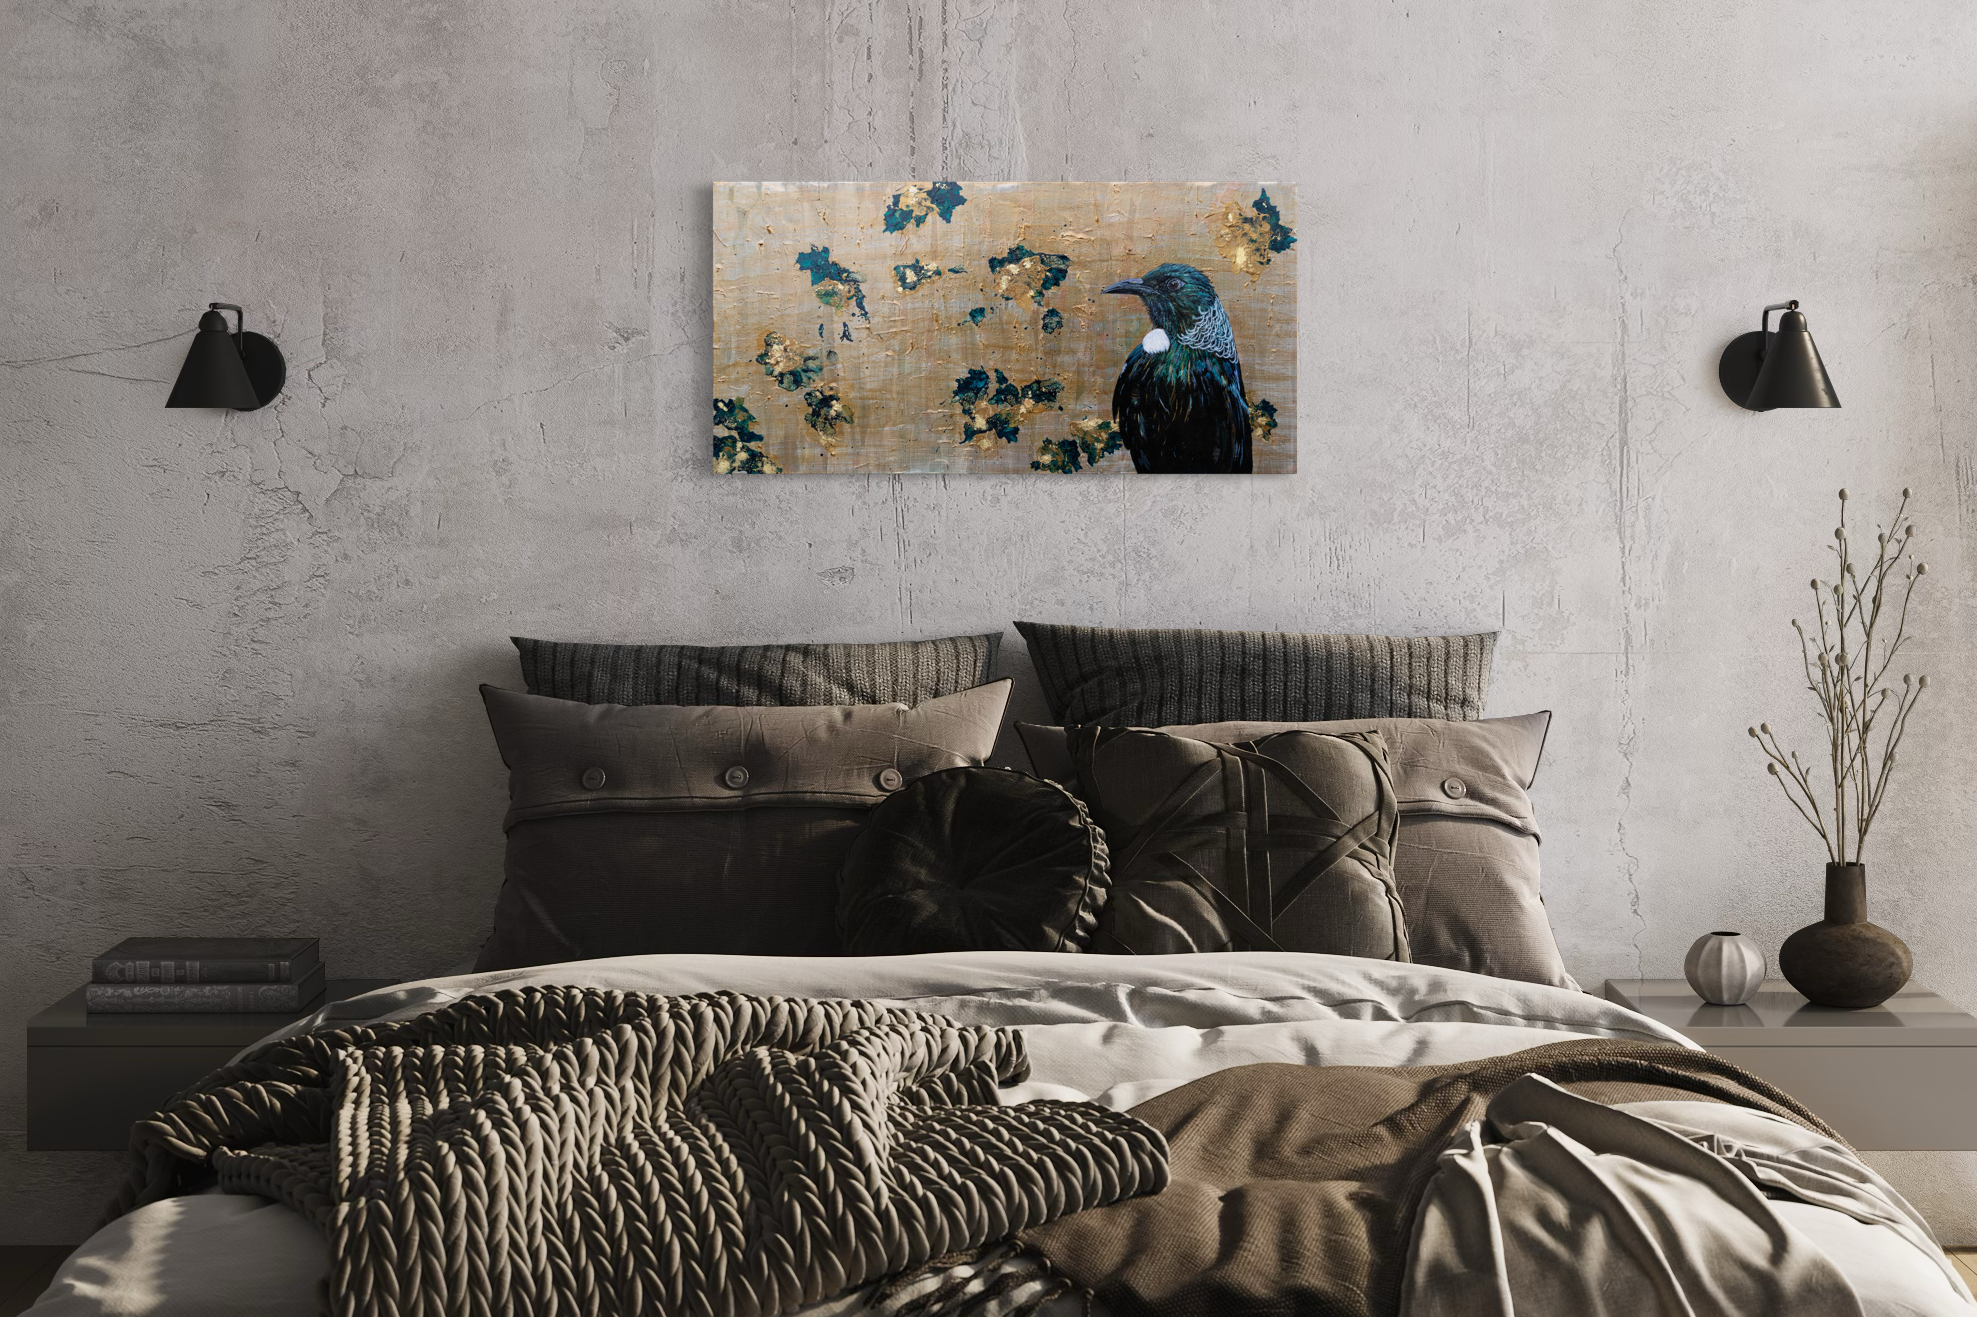 NZ Tui realism & abstract acrylic painting with gold and bronze metallics